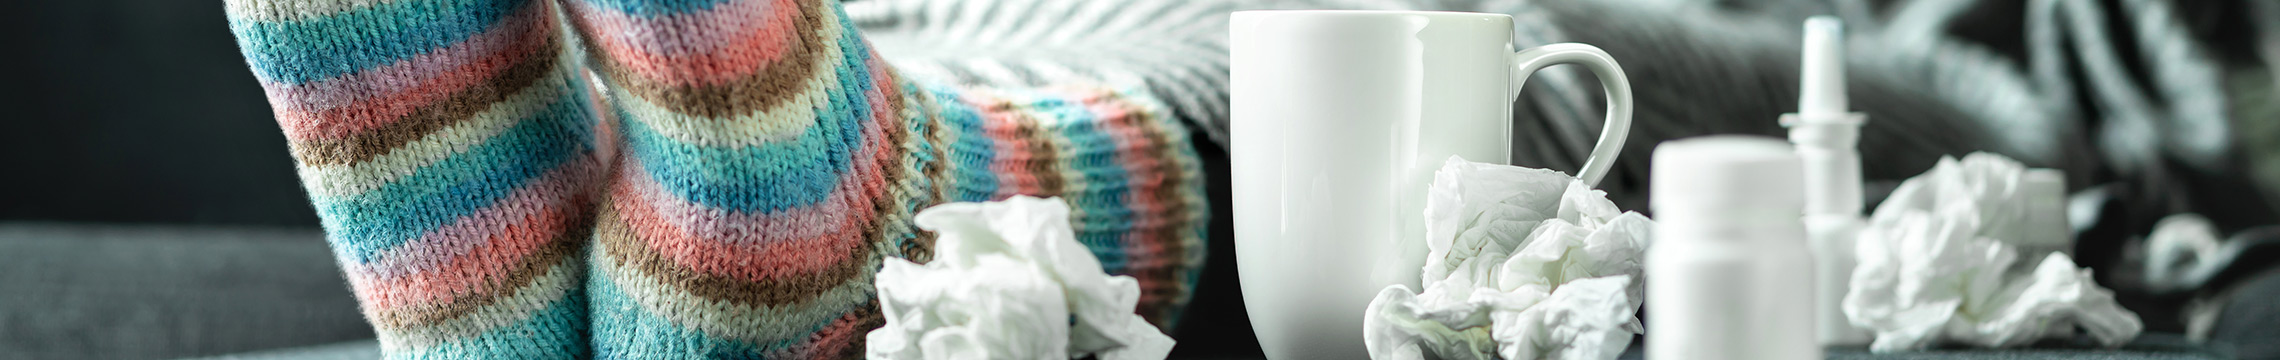 Woman on couch with cozy socks blowing nose while surrounded by tissues, medicine, and warm tea